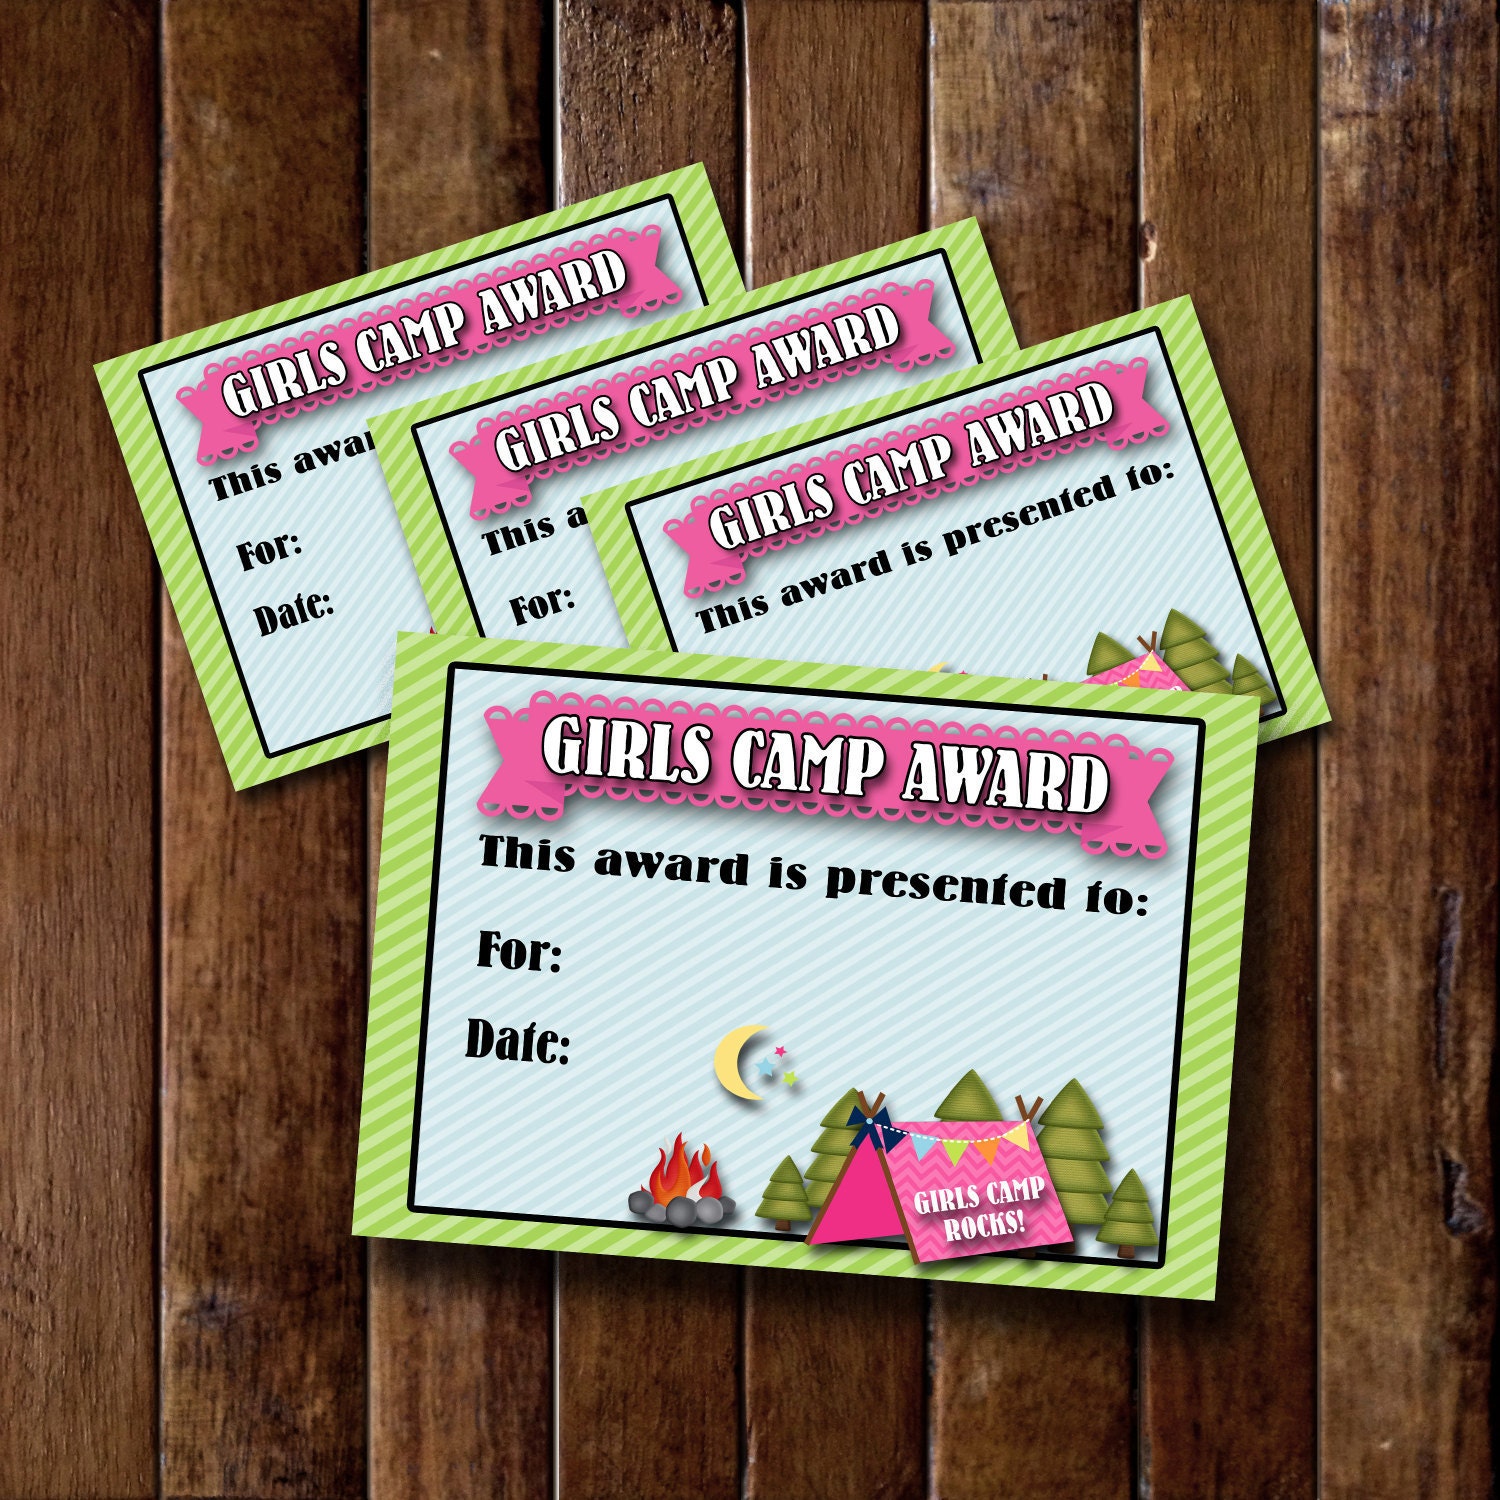 girls-camp-awards-certificate-4-3-5x5-cards-instant